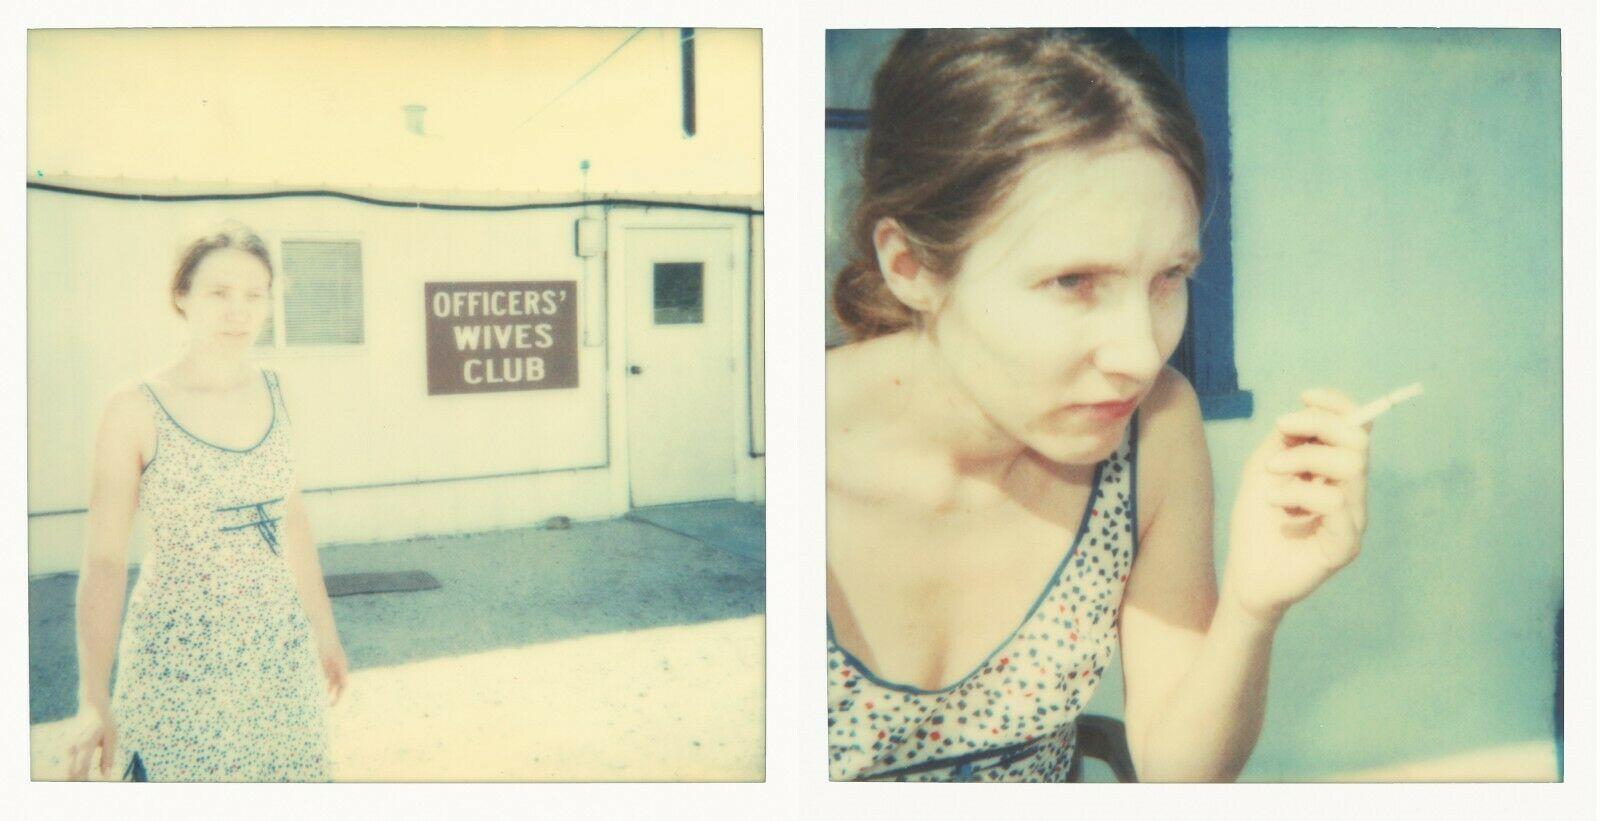 Officer's Wives Club - Contemporary, 21st Century, Polaroid, Figurative